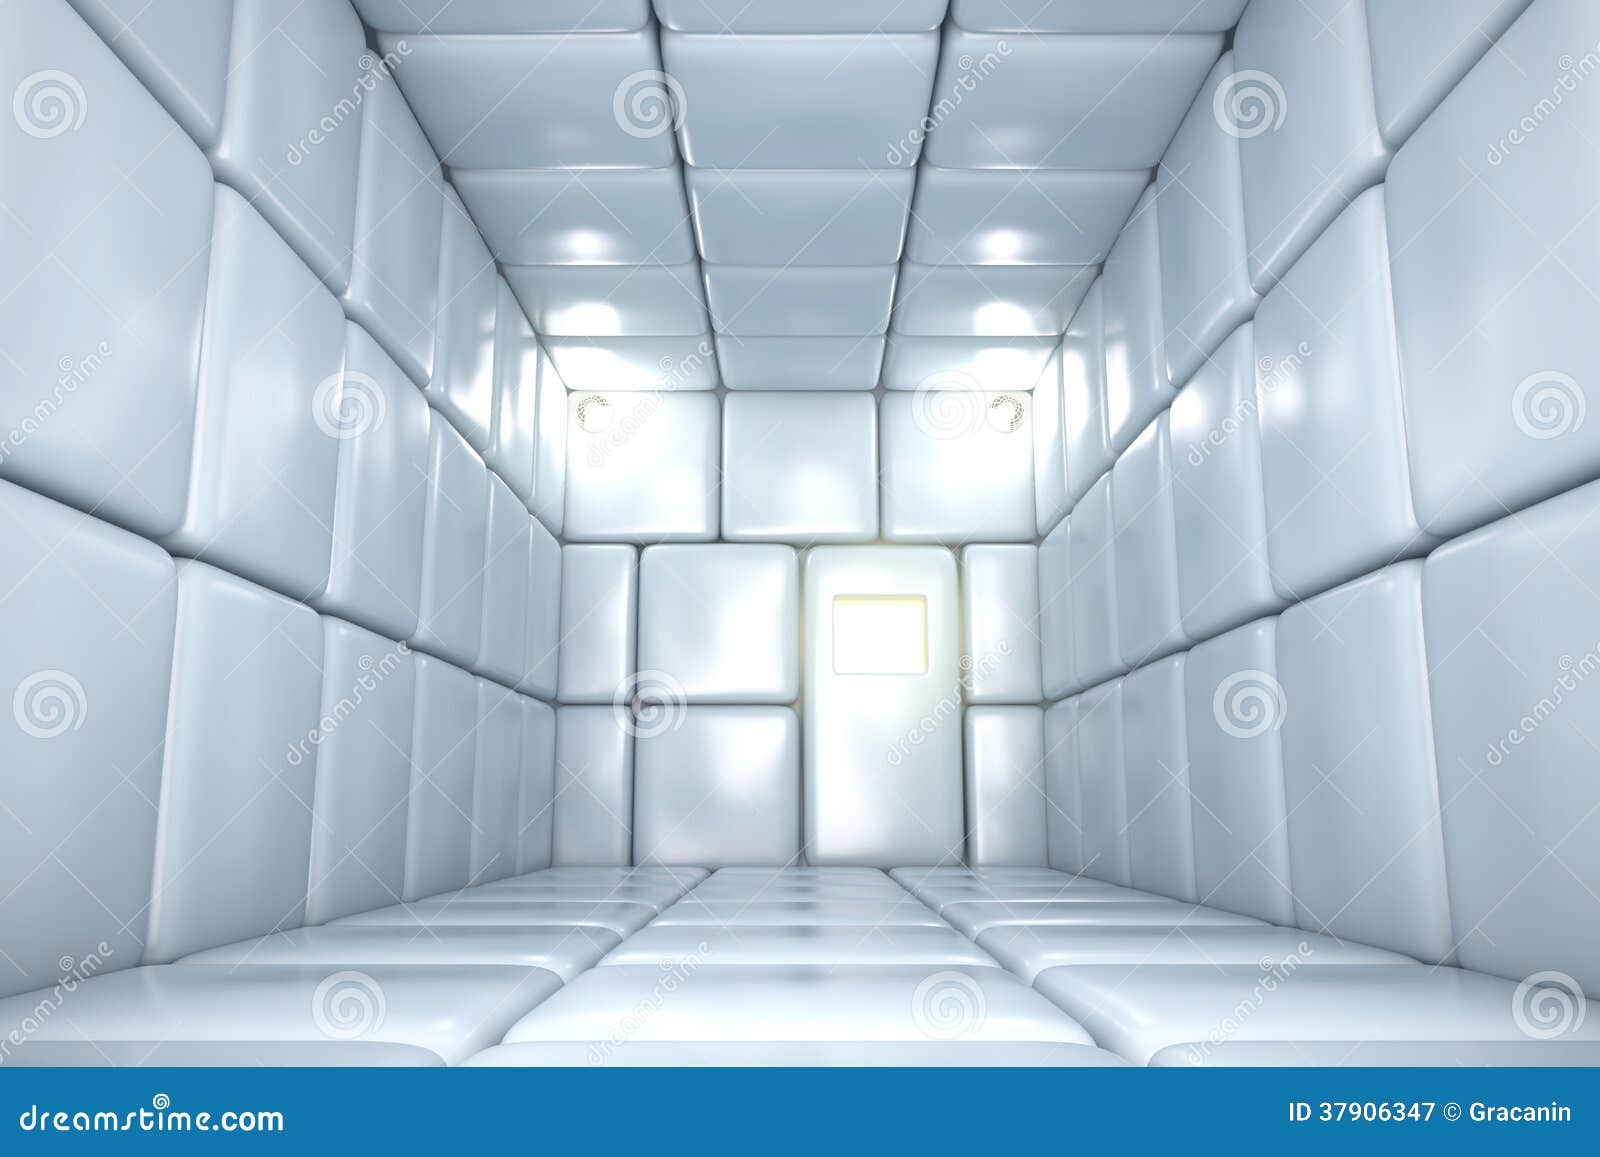 Padded Room Stock Image Image Of Acoustic Institution